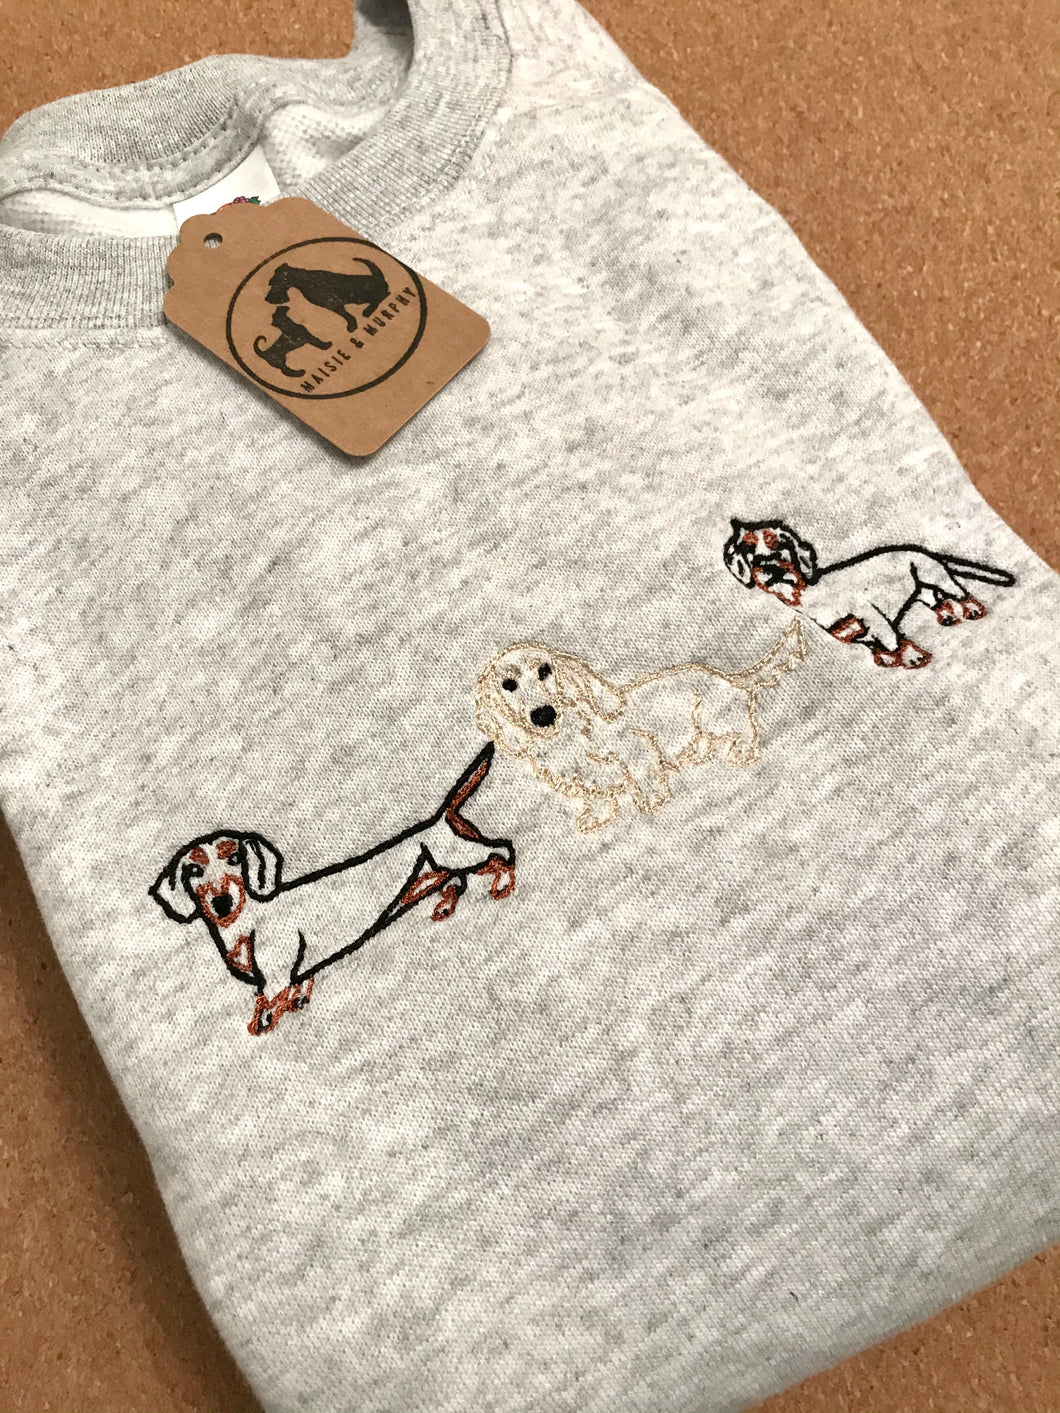 Embroidered Dachshund Sweatshirt - Gifts for sausage dog lovers/ owners